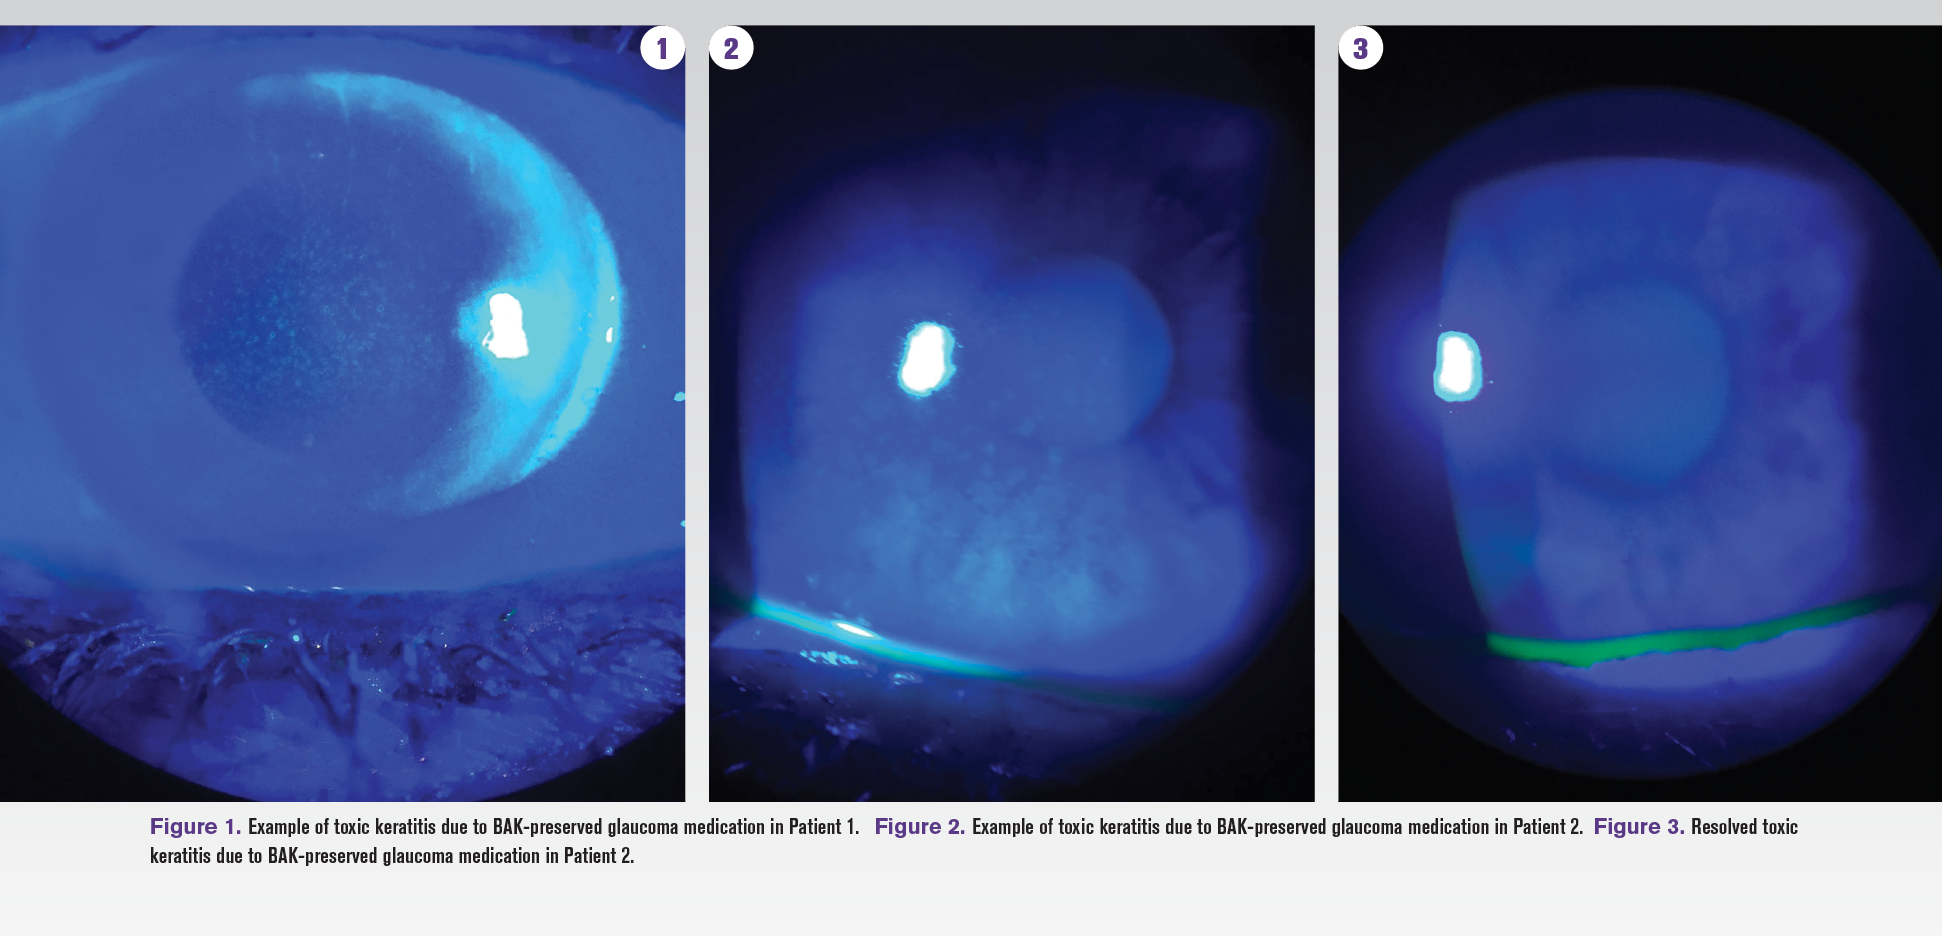 Glaucoma & ocular surface preservation: Key factors for ODs to consider